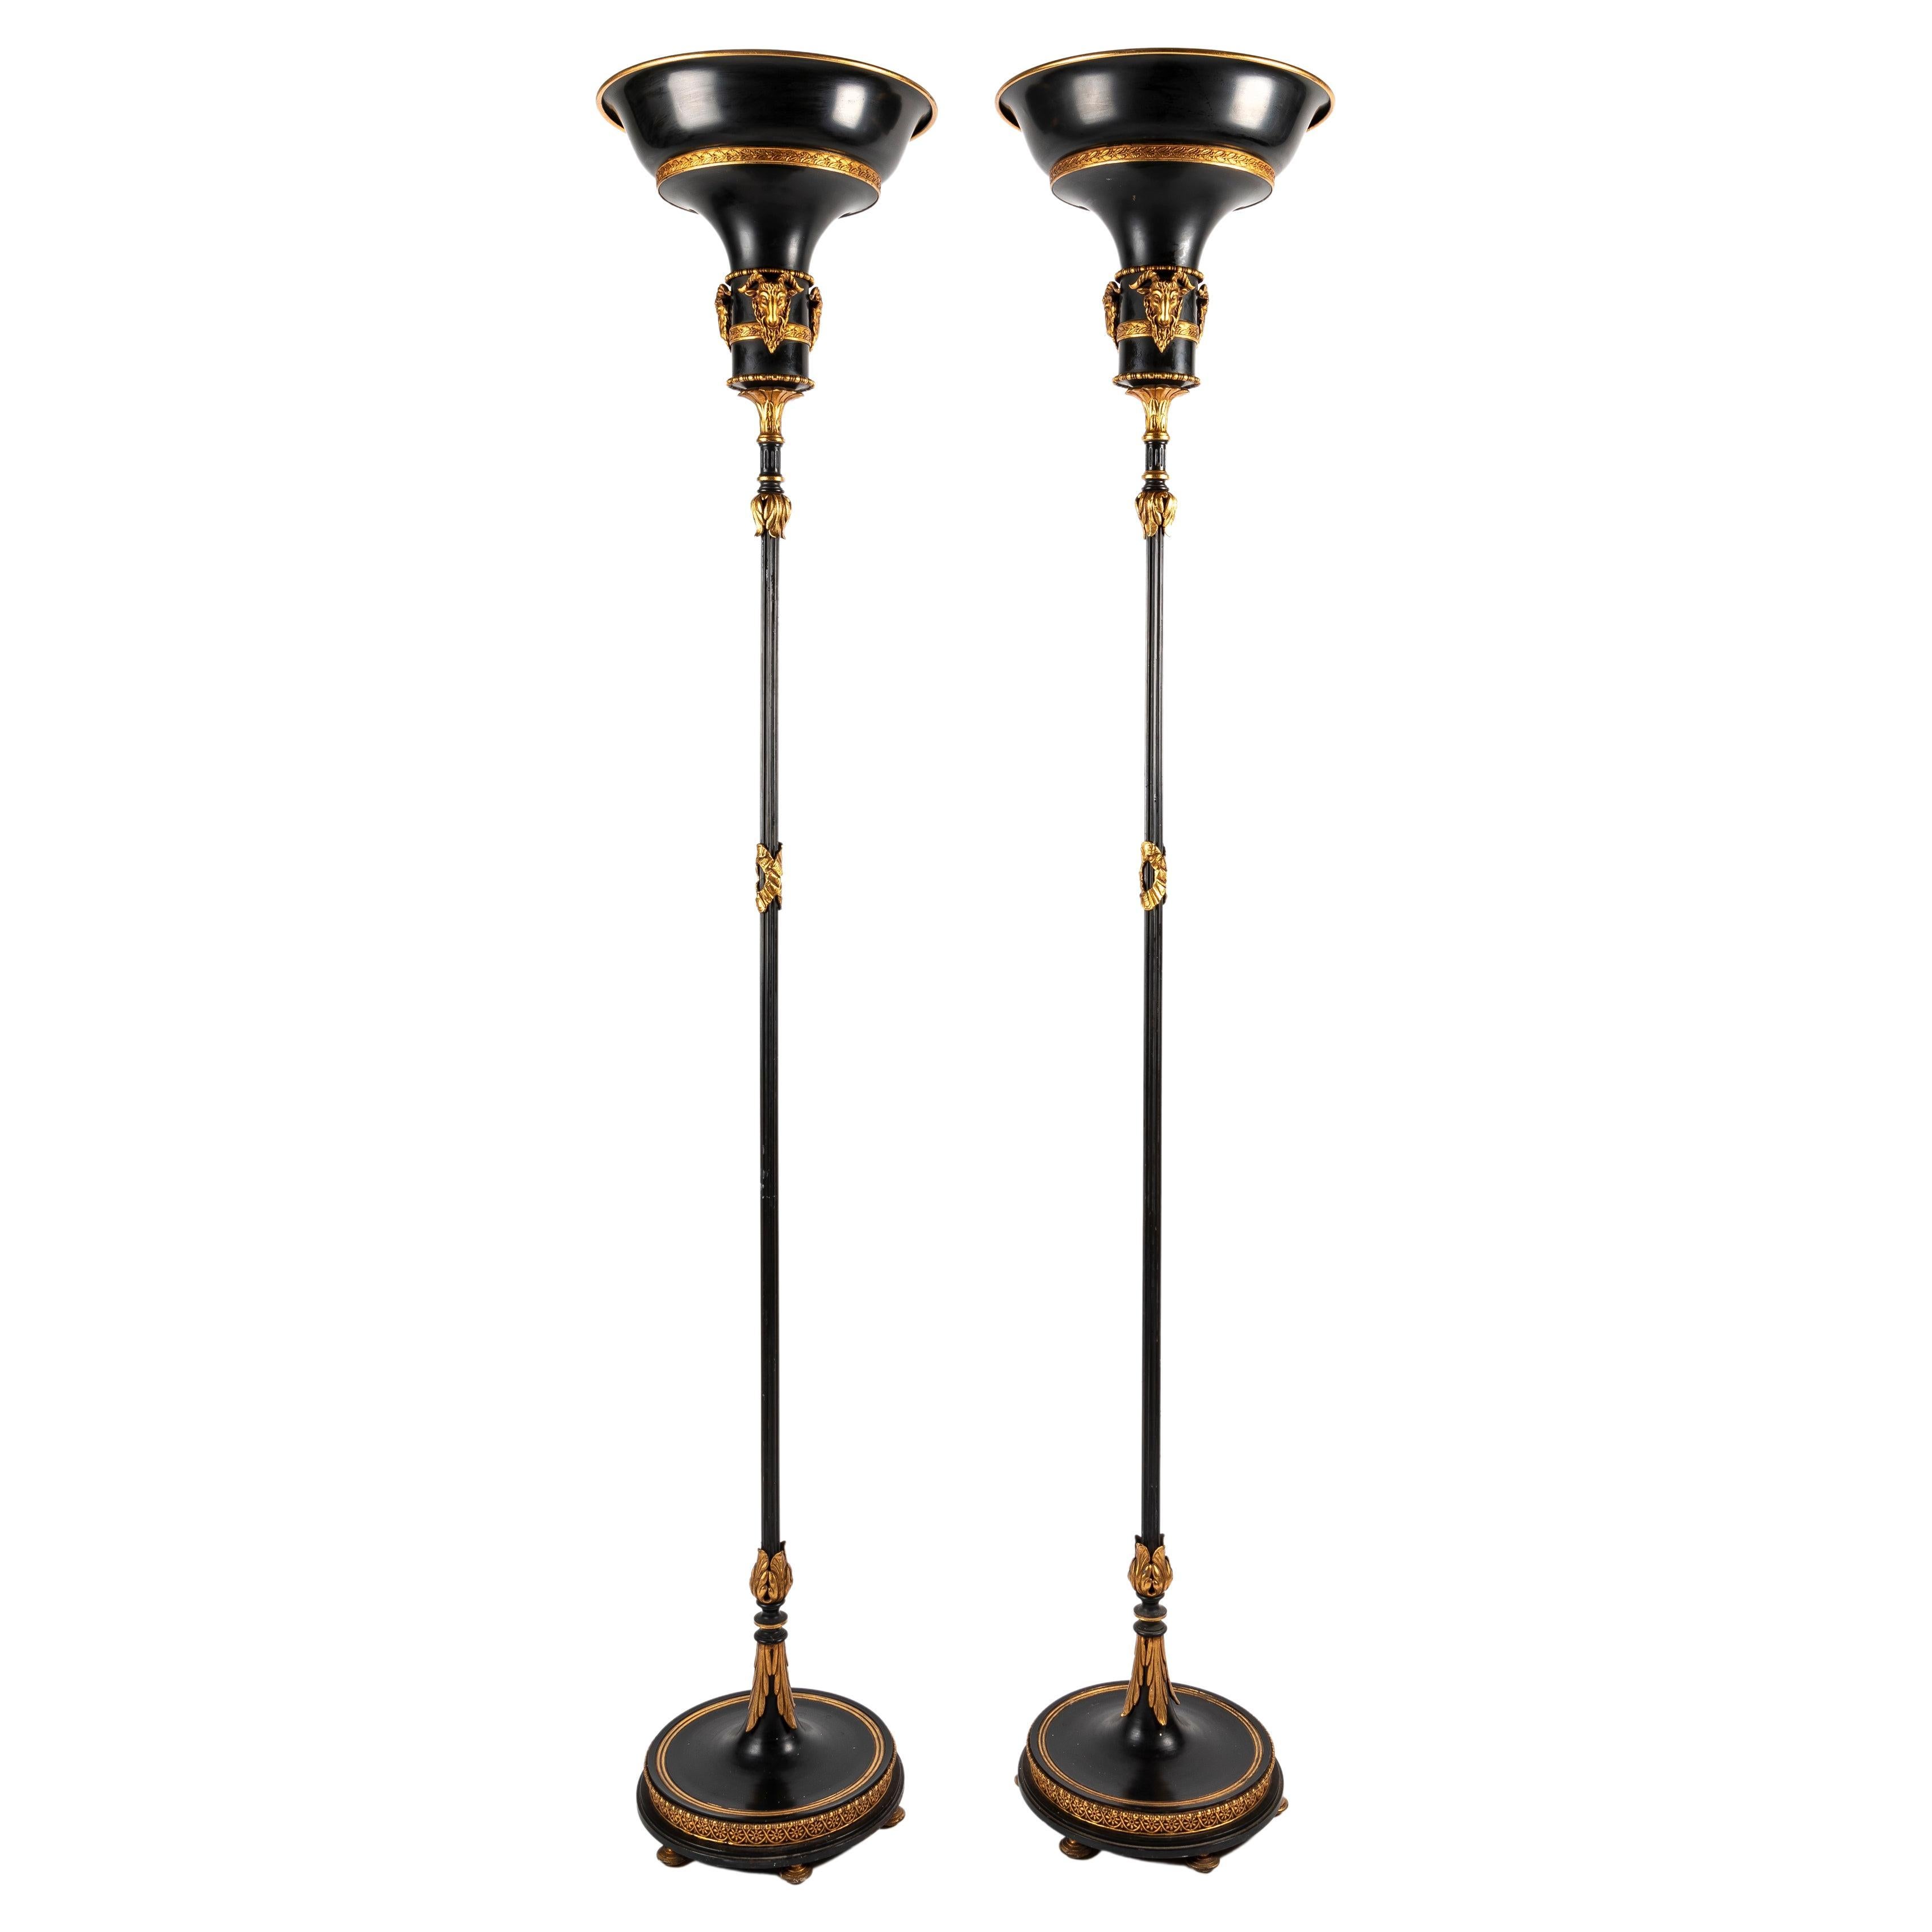 A Pair of Tall Hollywood Regency Bronze Floor Lamps